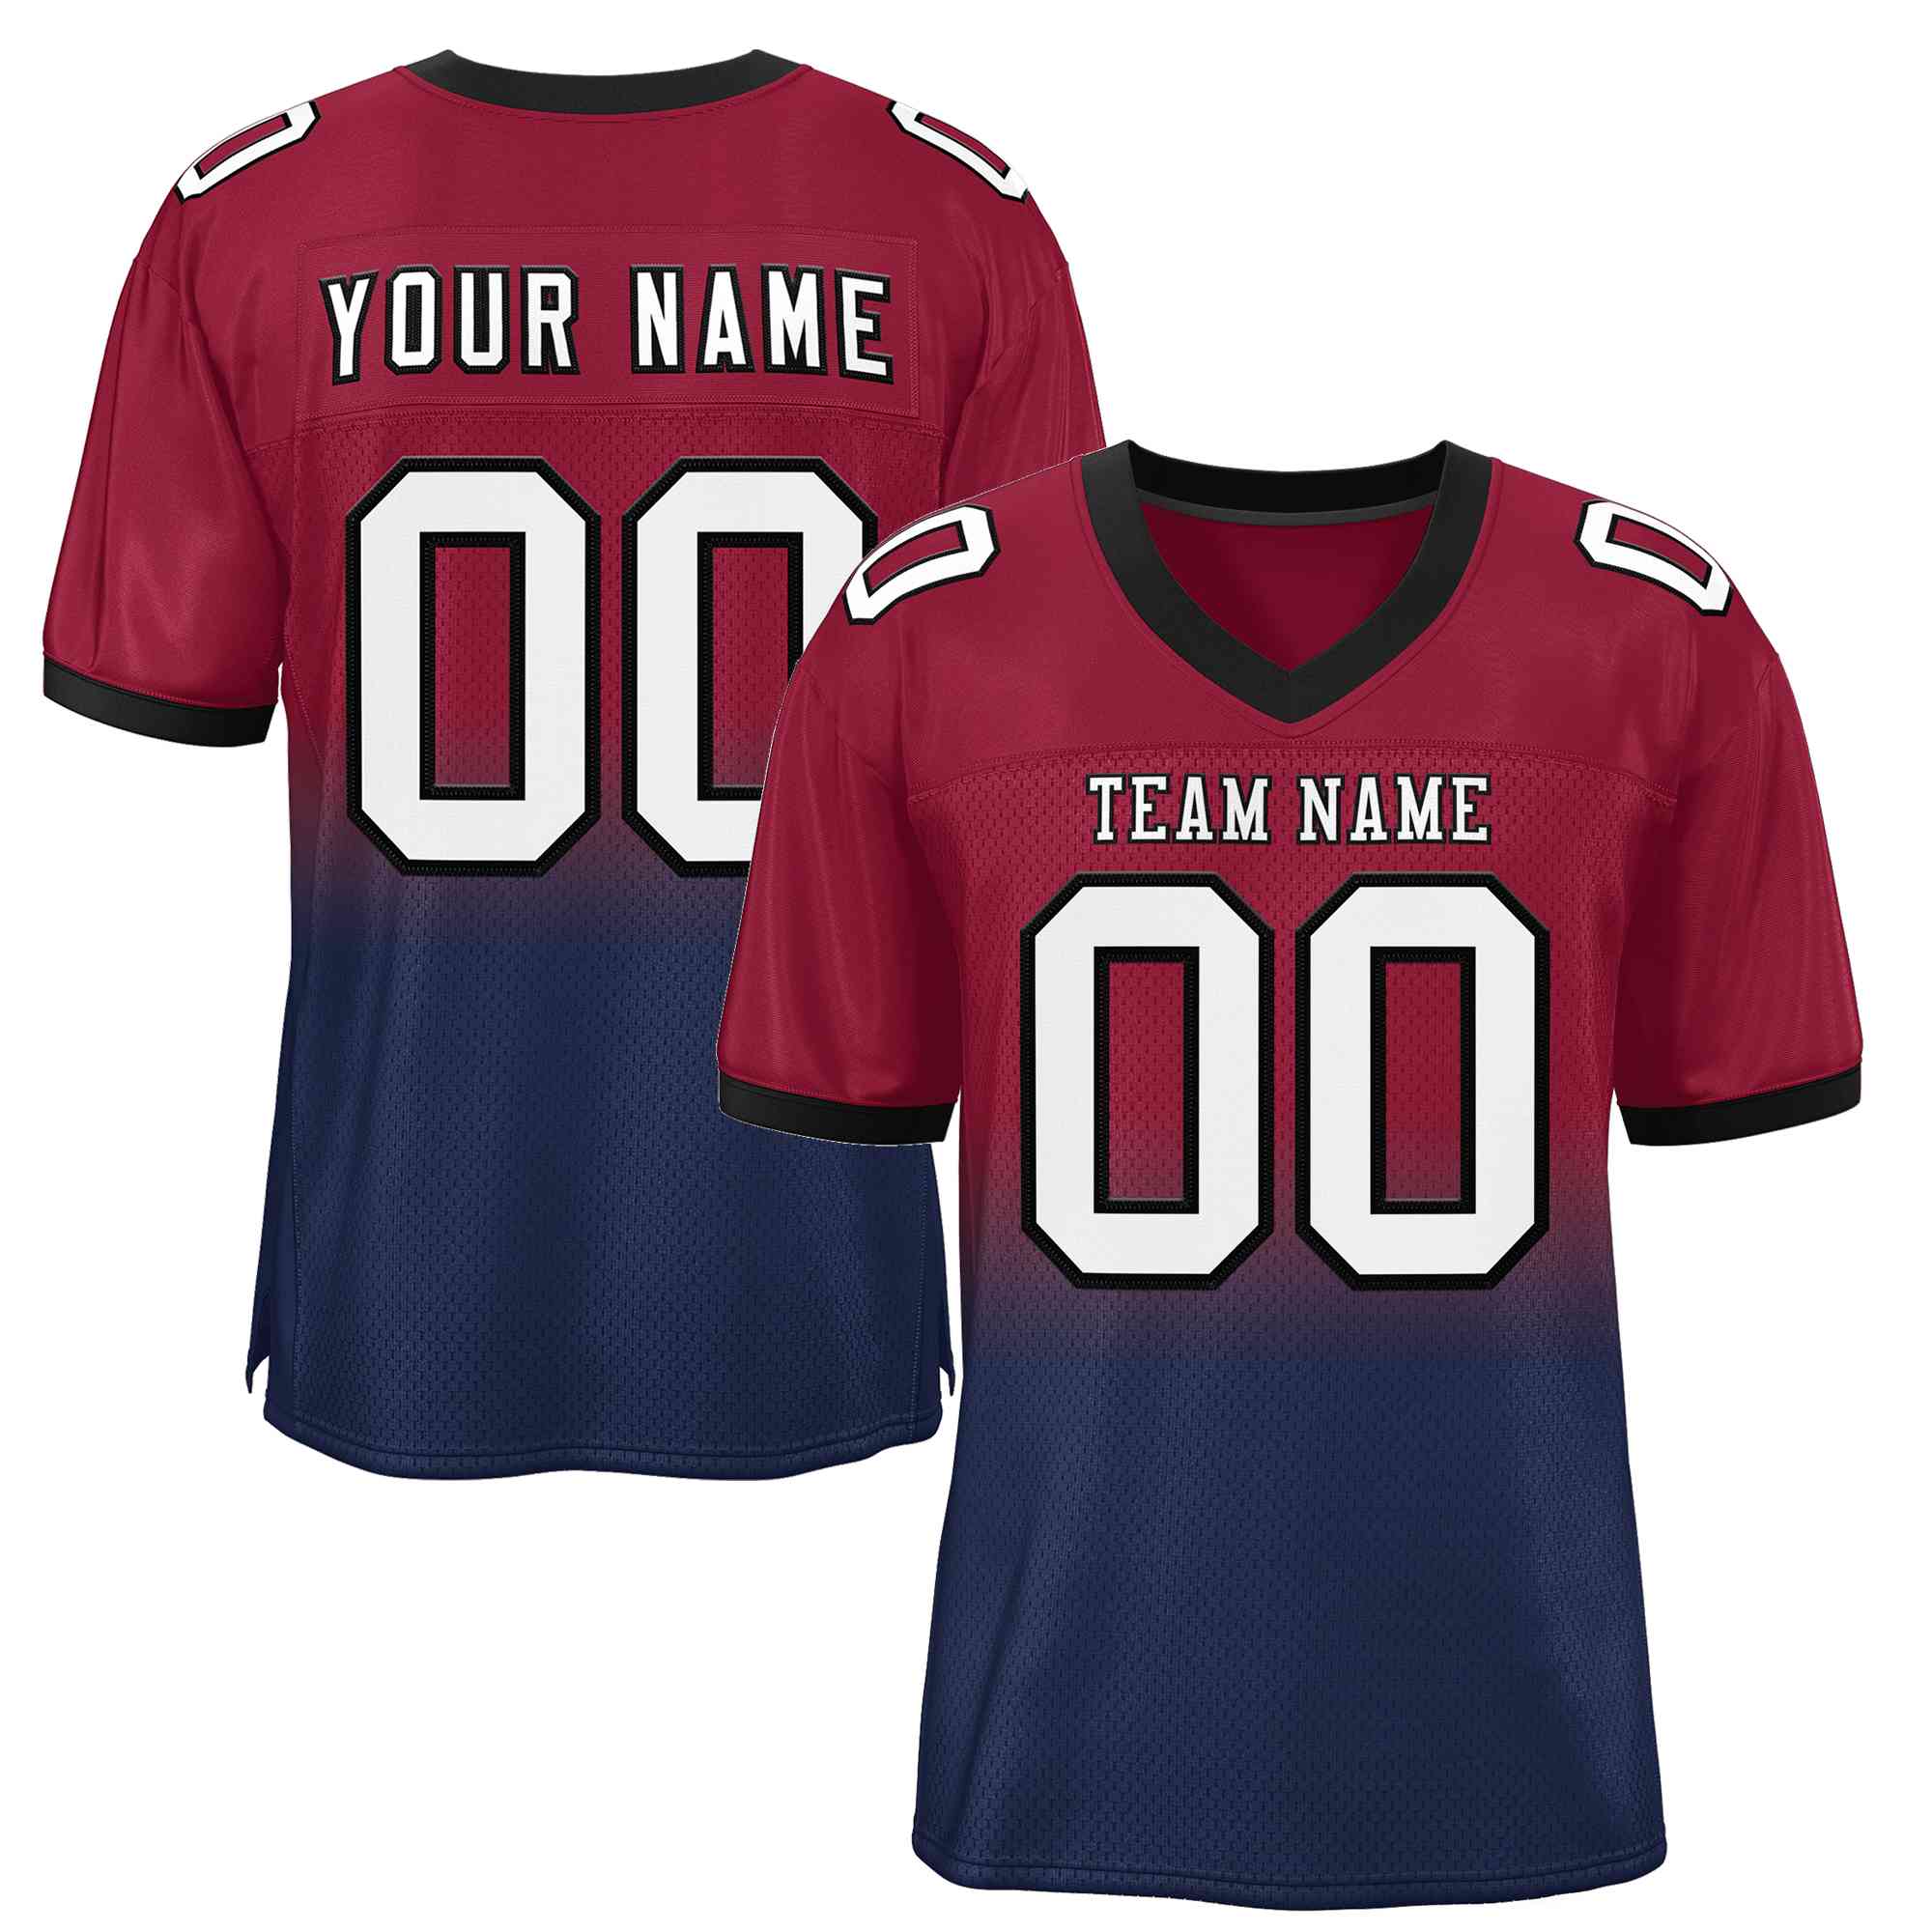 youth football uniforms